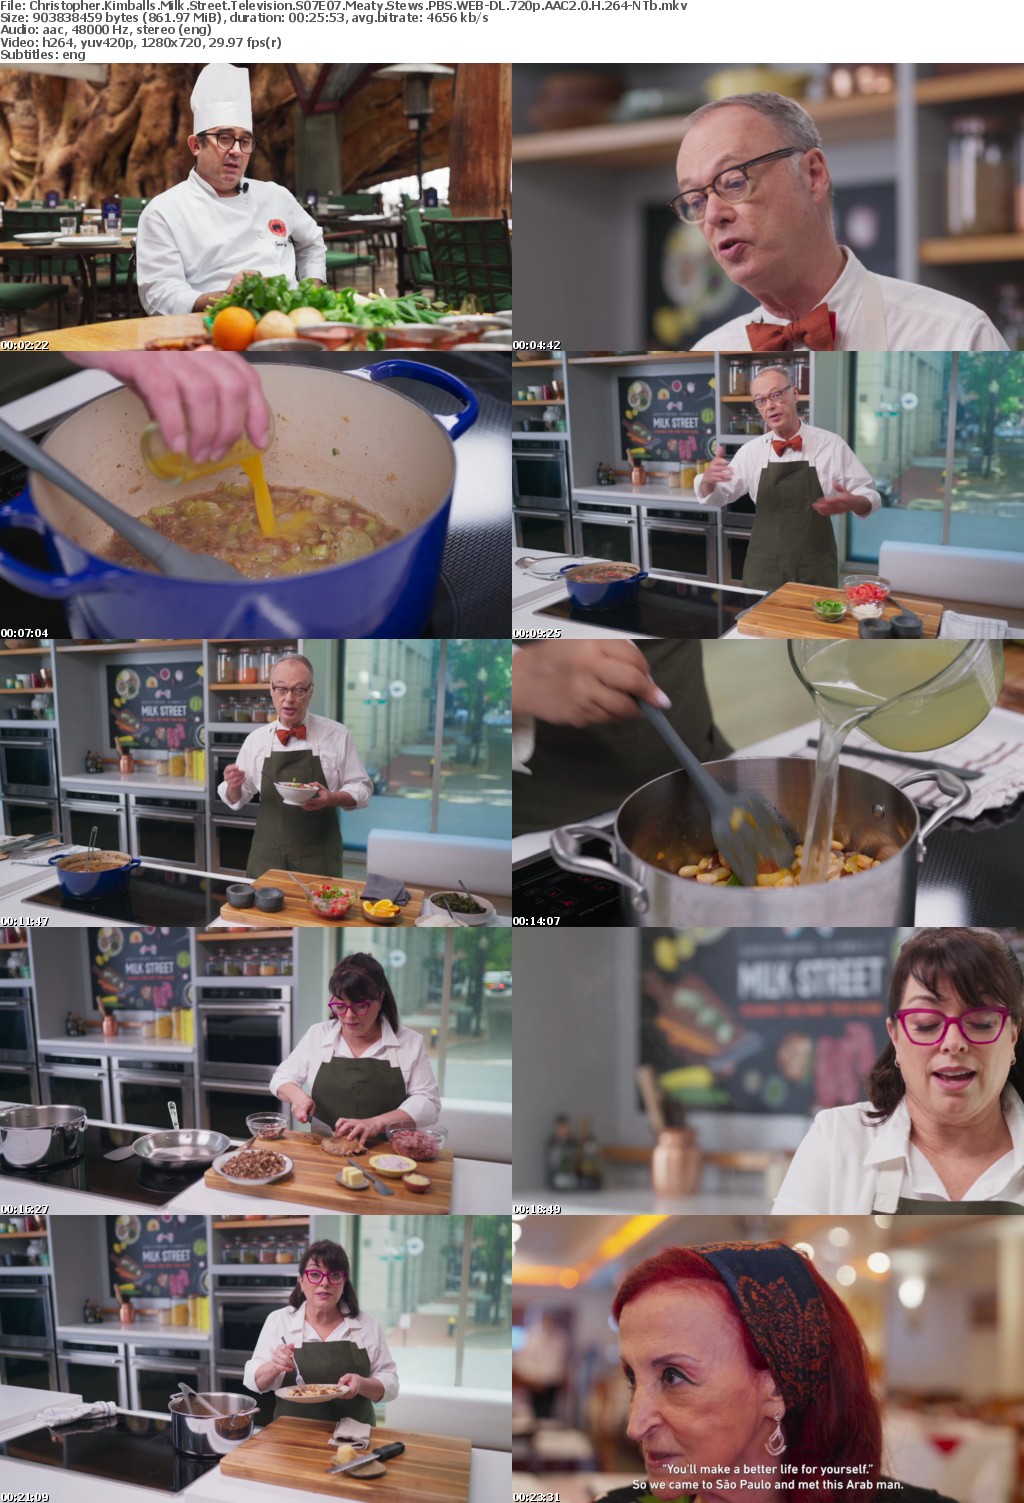 Christopher Kimballs Milk Street Television S07E07 Meaty Stews PBS WEB-DL 720p AAC2 0 H 264-NTb